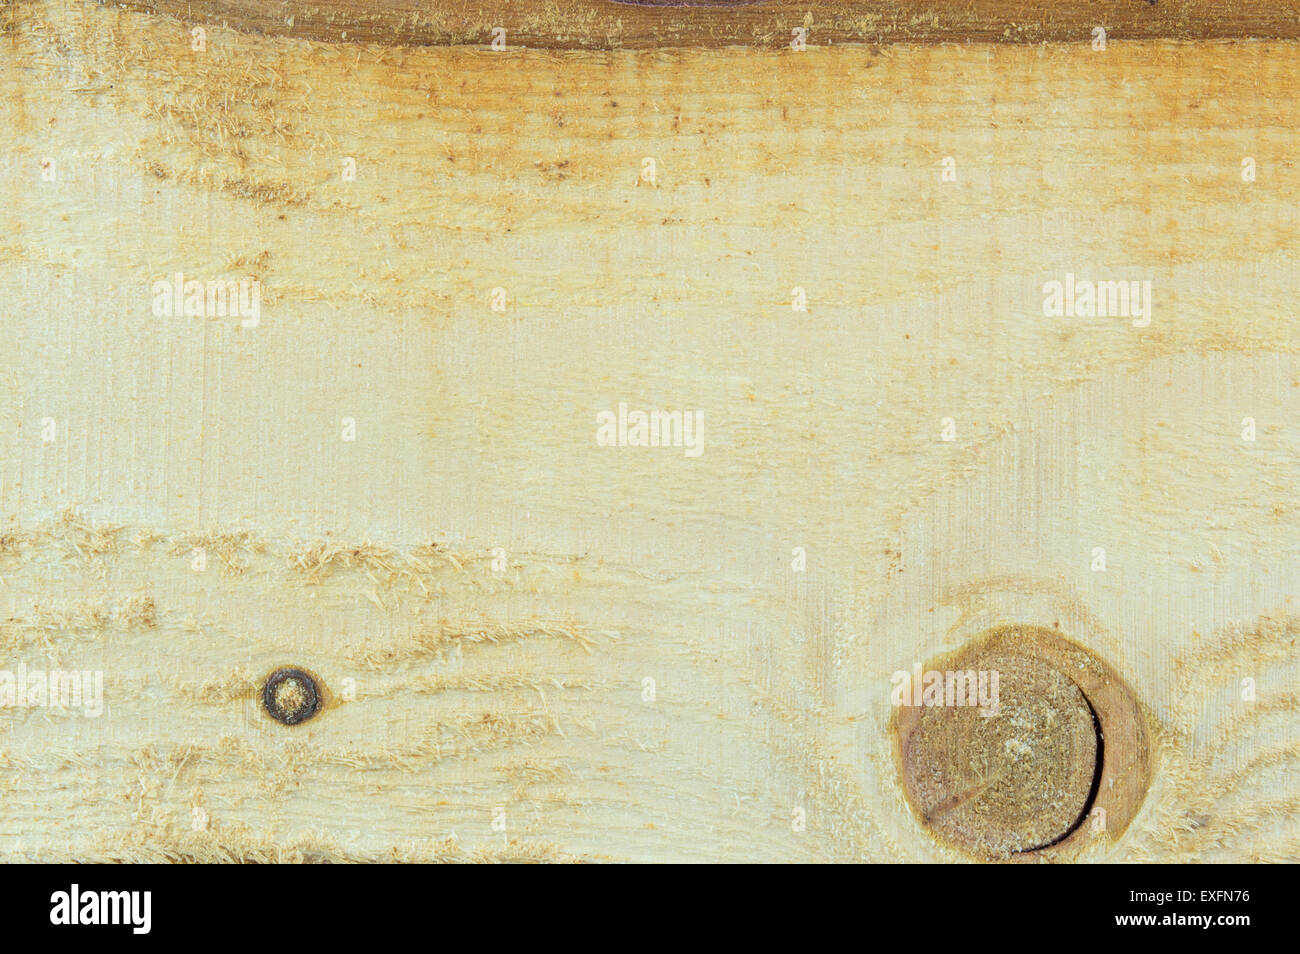 Natural raw and unprocessed wooden board background Stock Photo